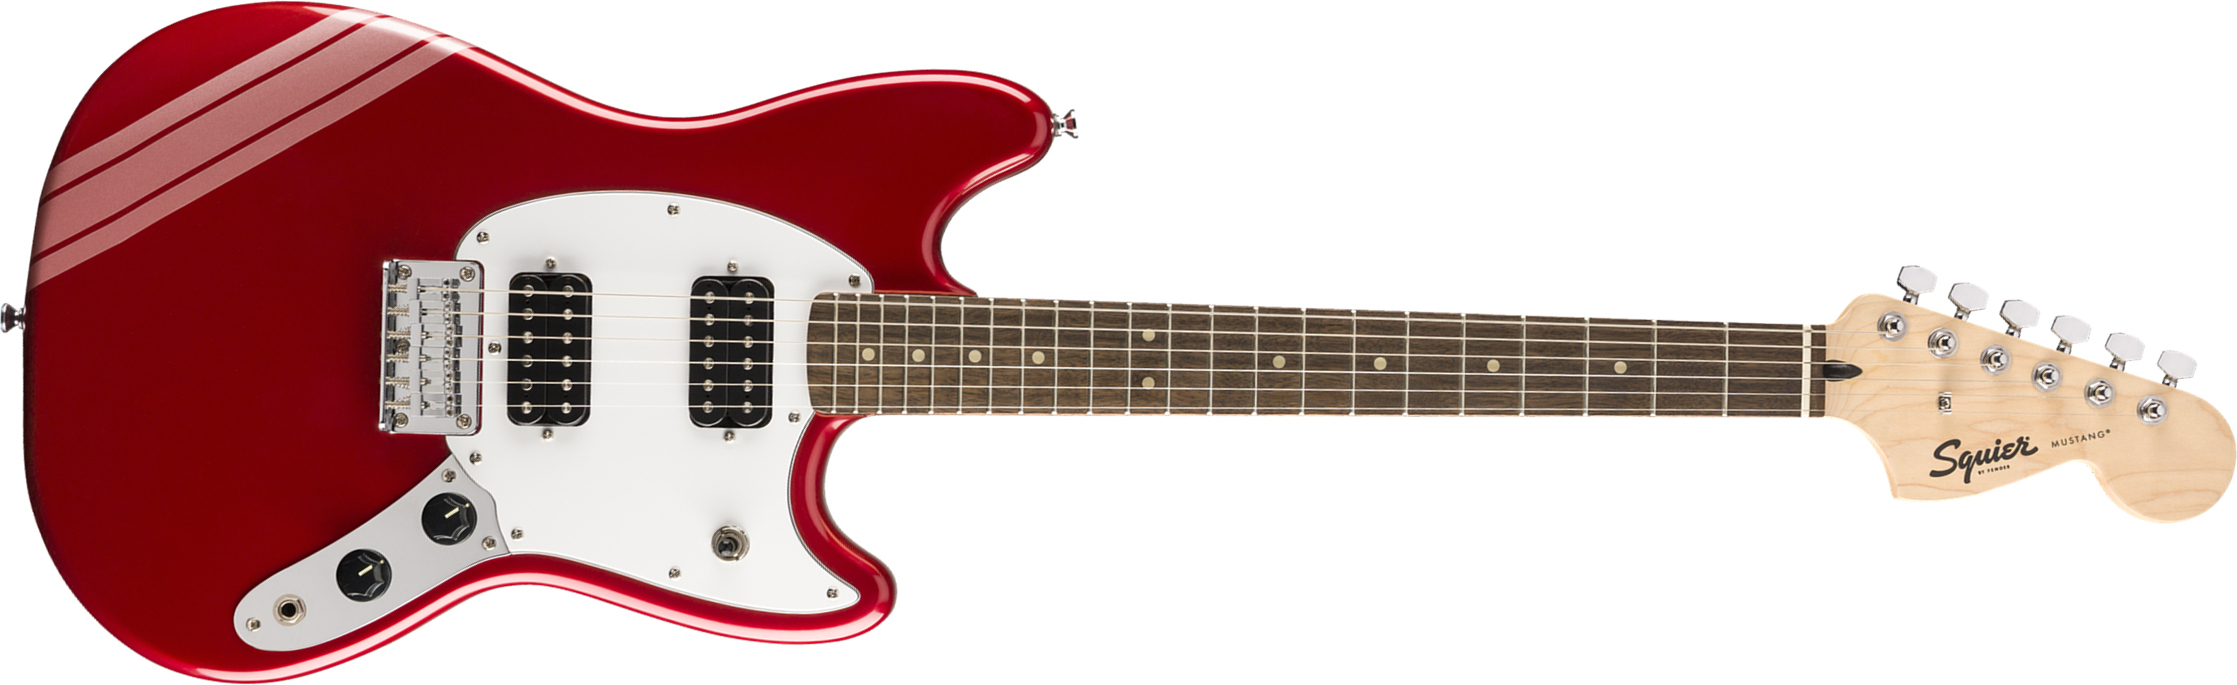 Squier Mustang Bullet Competition Hh Fsr Ht Lau - Candy Apple Red - Guitarra electrica retro rock - Main picture